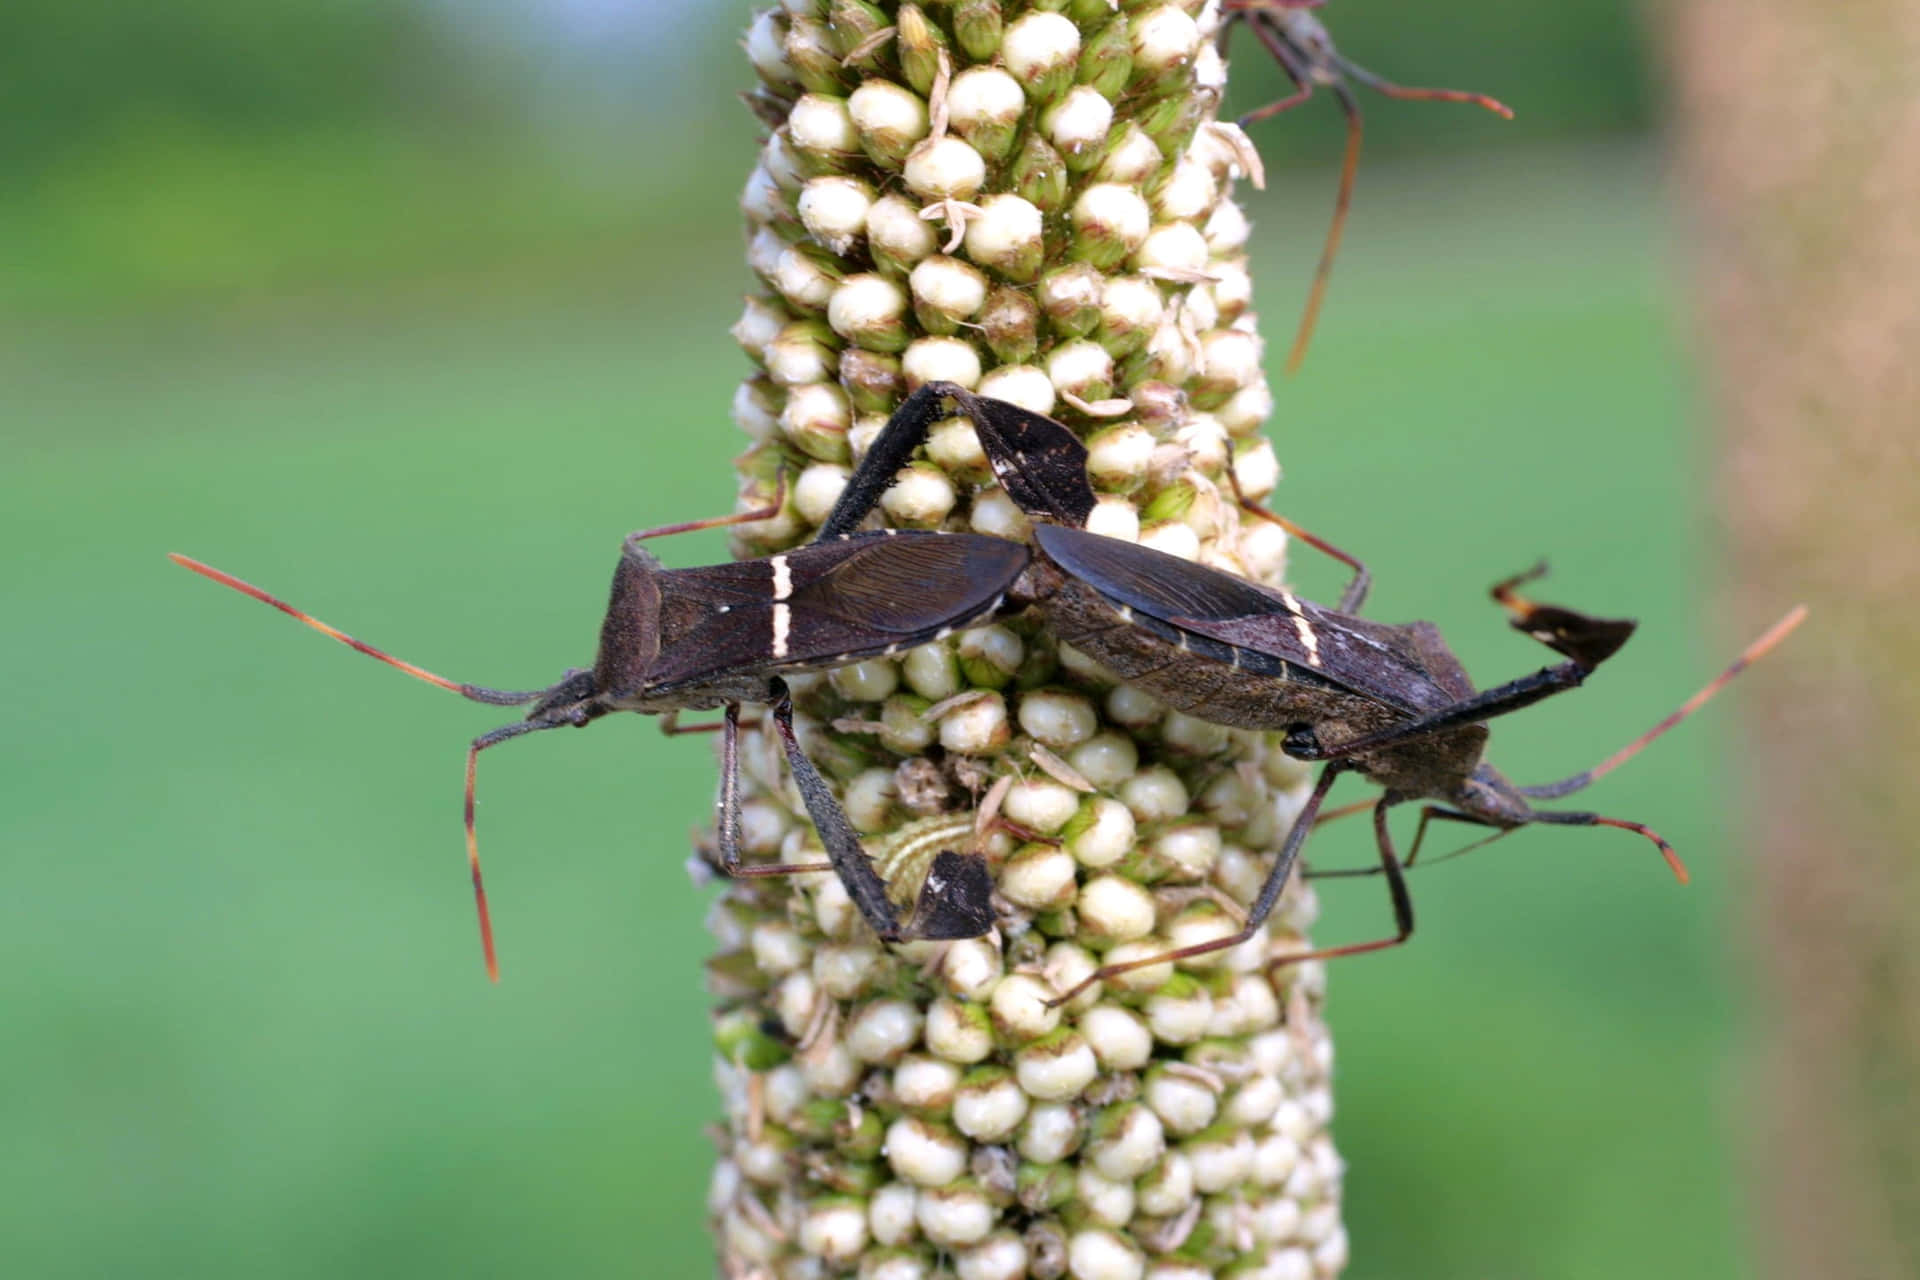 Leaffooted_ Bugs_ On_ Plant_ Stalk Wallpaper